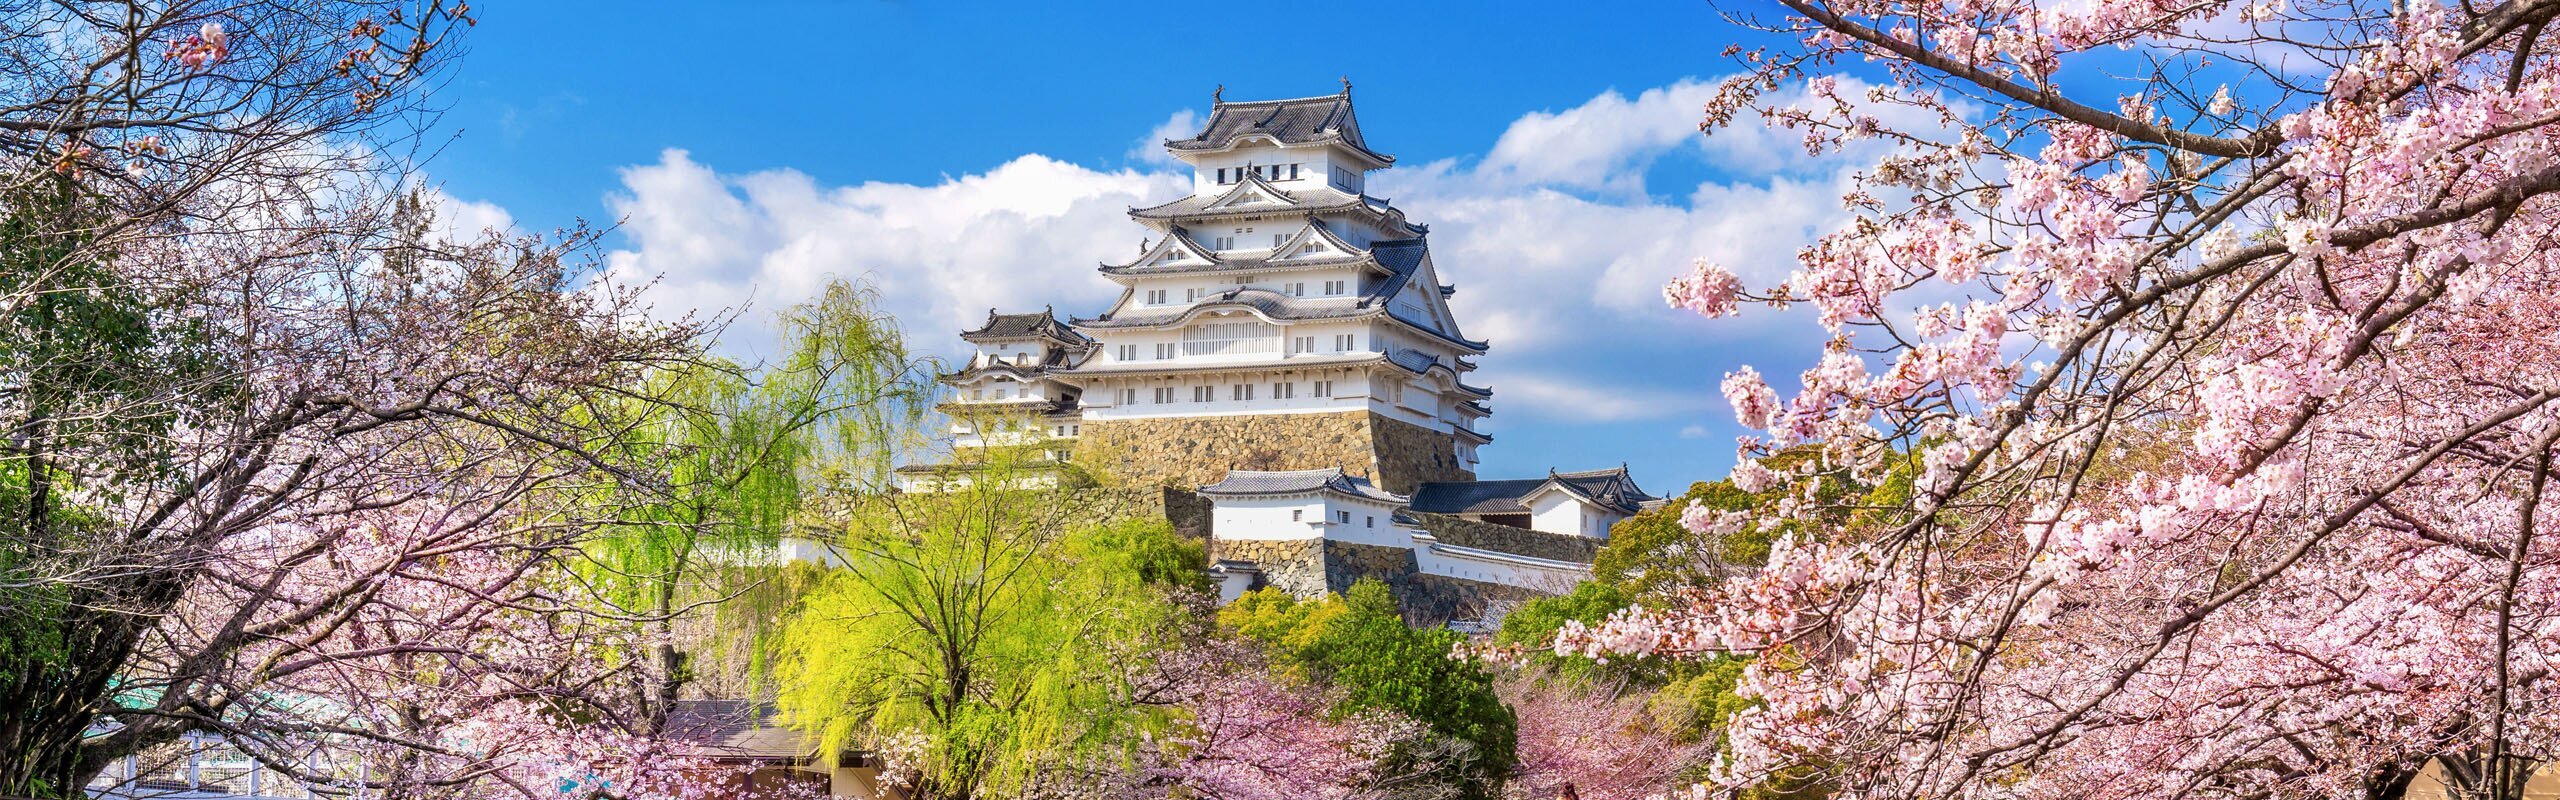 2-Week Highlights of Japan in the Cherry Blossom Season